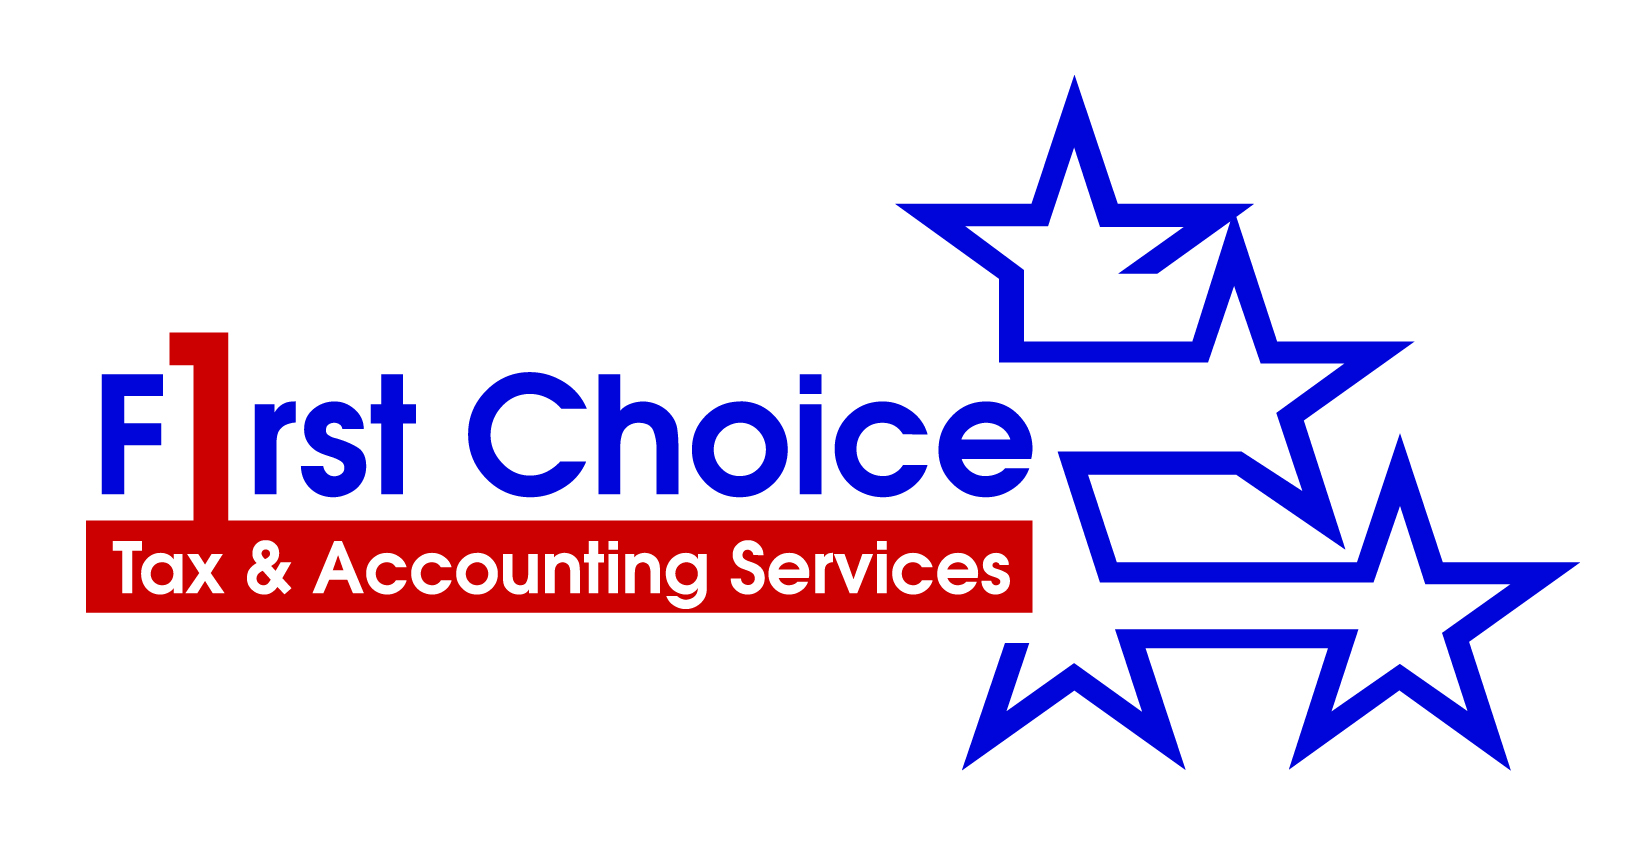 First Choice Tax & Accounting Services